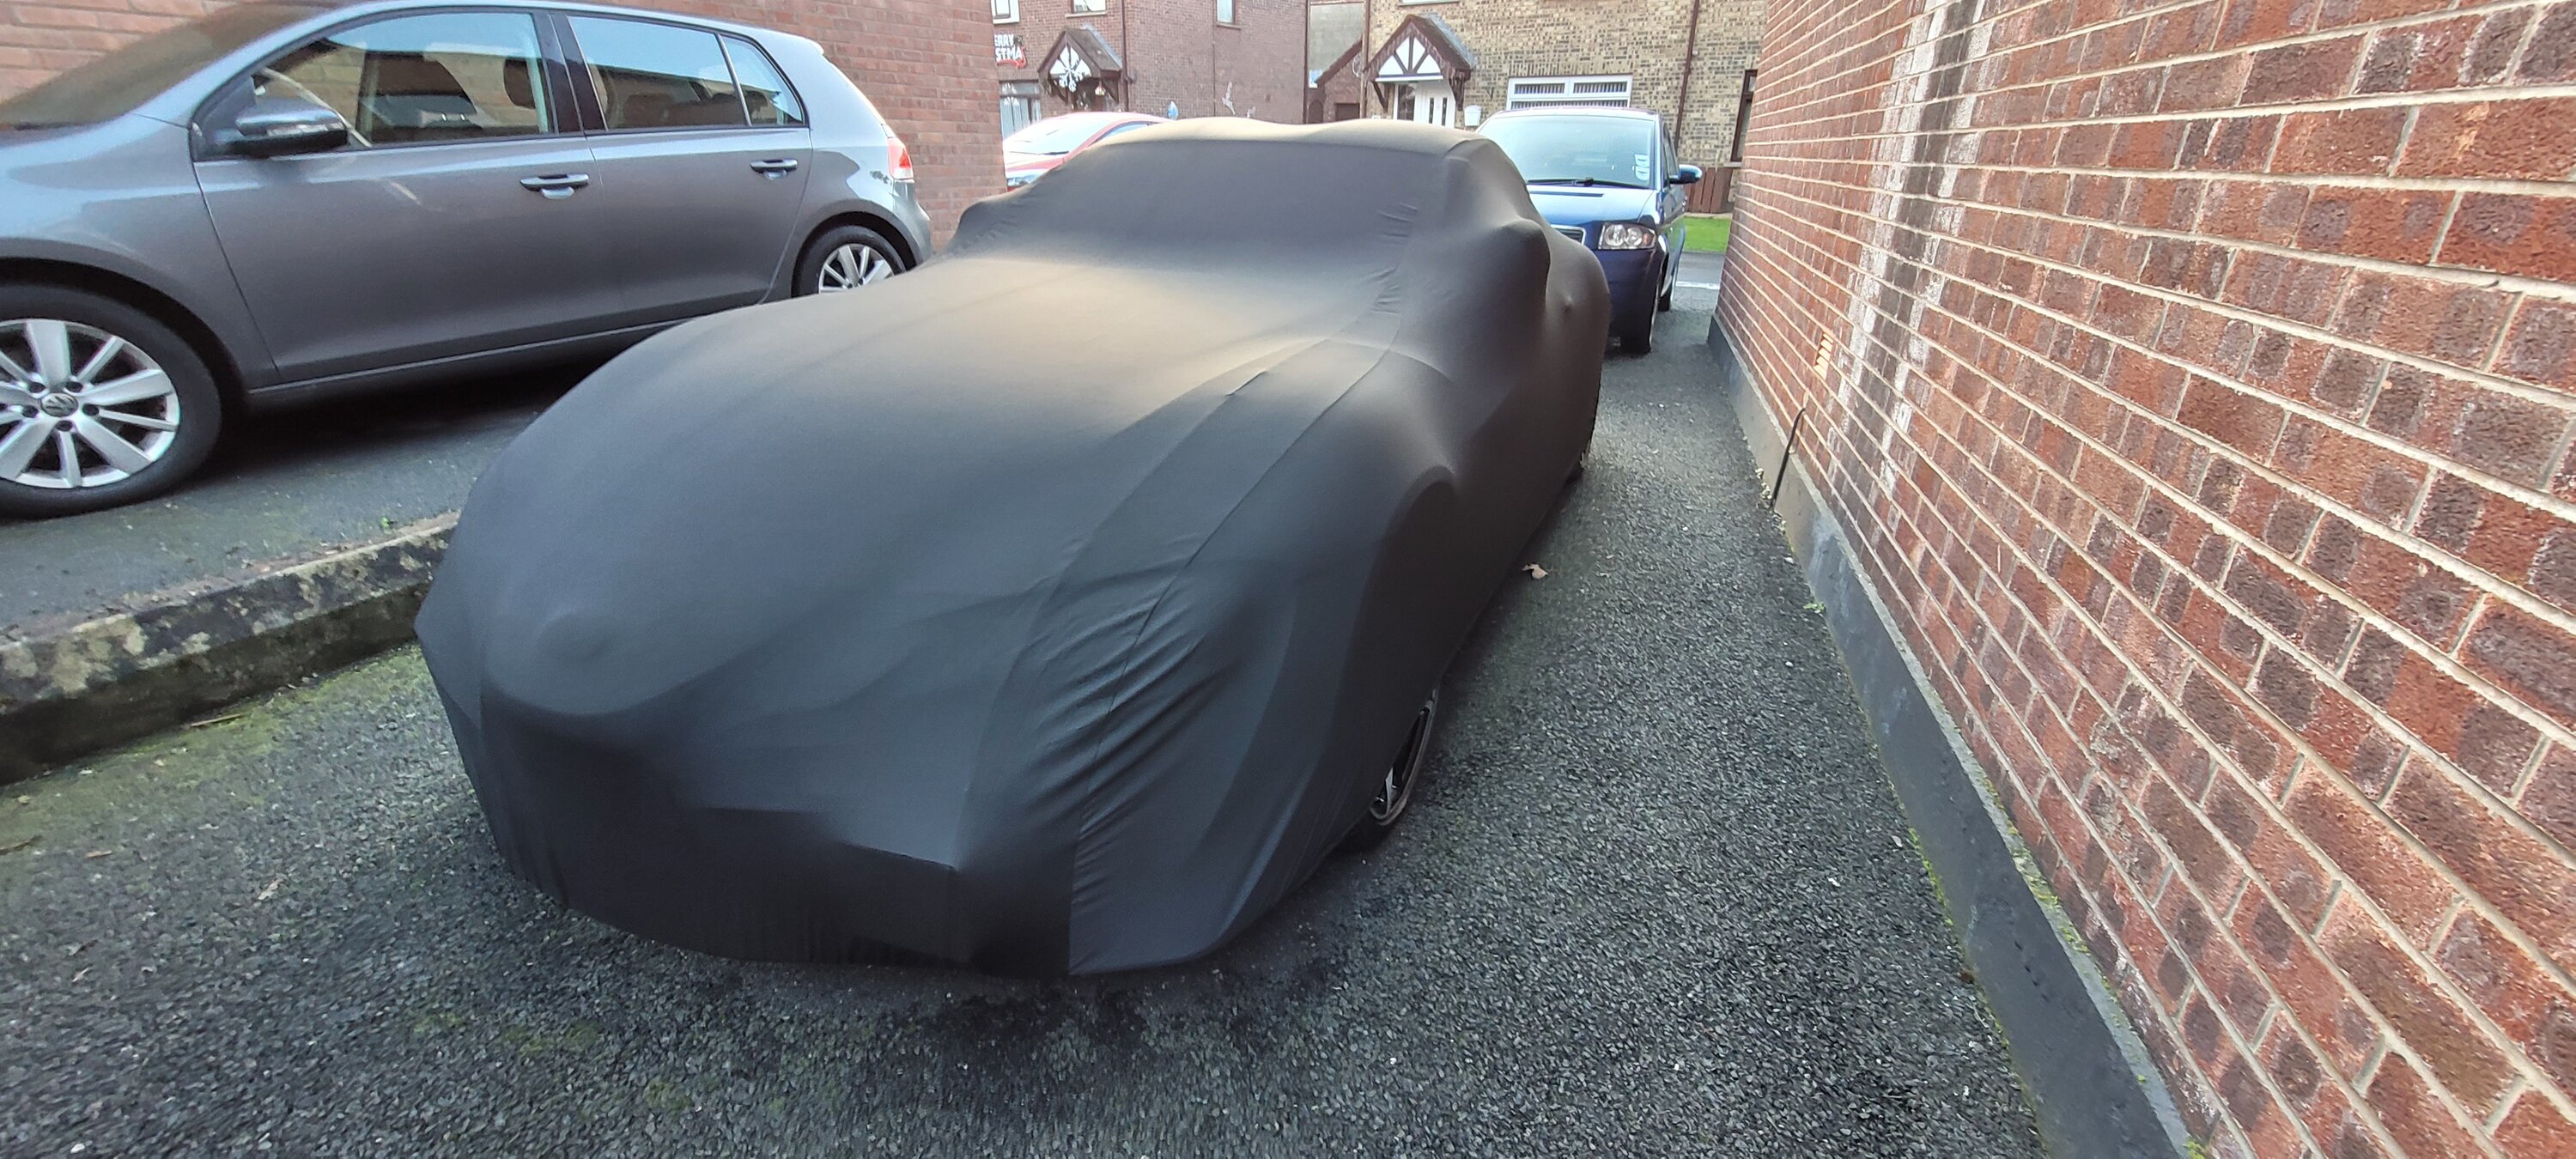  Car Cover for Toyota Supra MK5  Durable Dustproof Car Cover  Outdoor Full Car Cover Sun Waterproof Car Cover, Scratch  Proof/Durable/Breathable/Uv Protection with Zip Cotton Lined (Color : B,  Size 